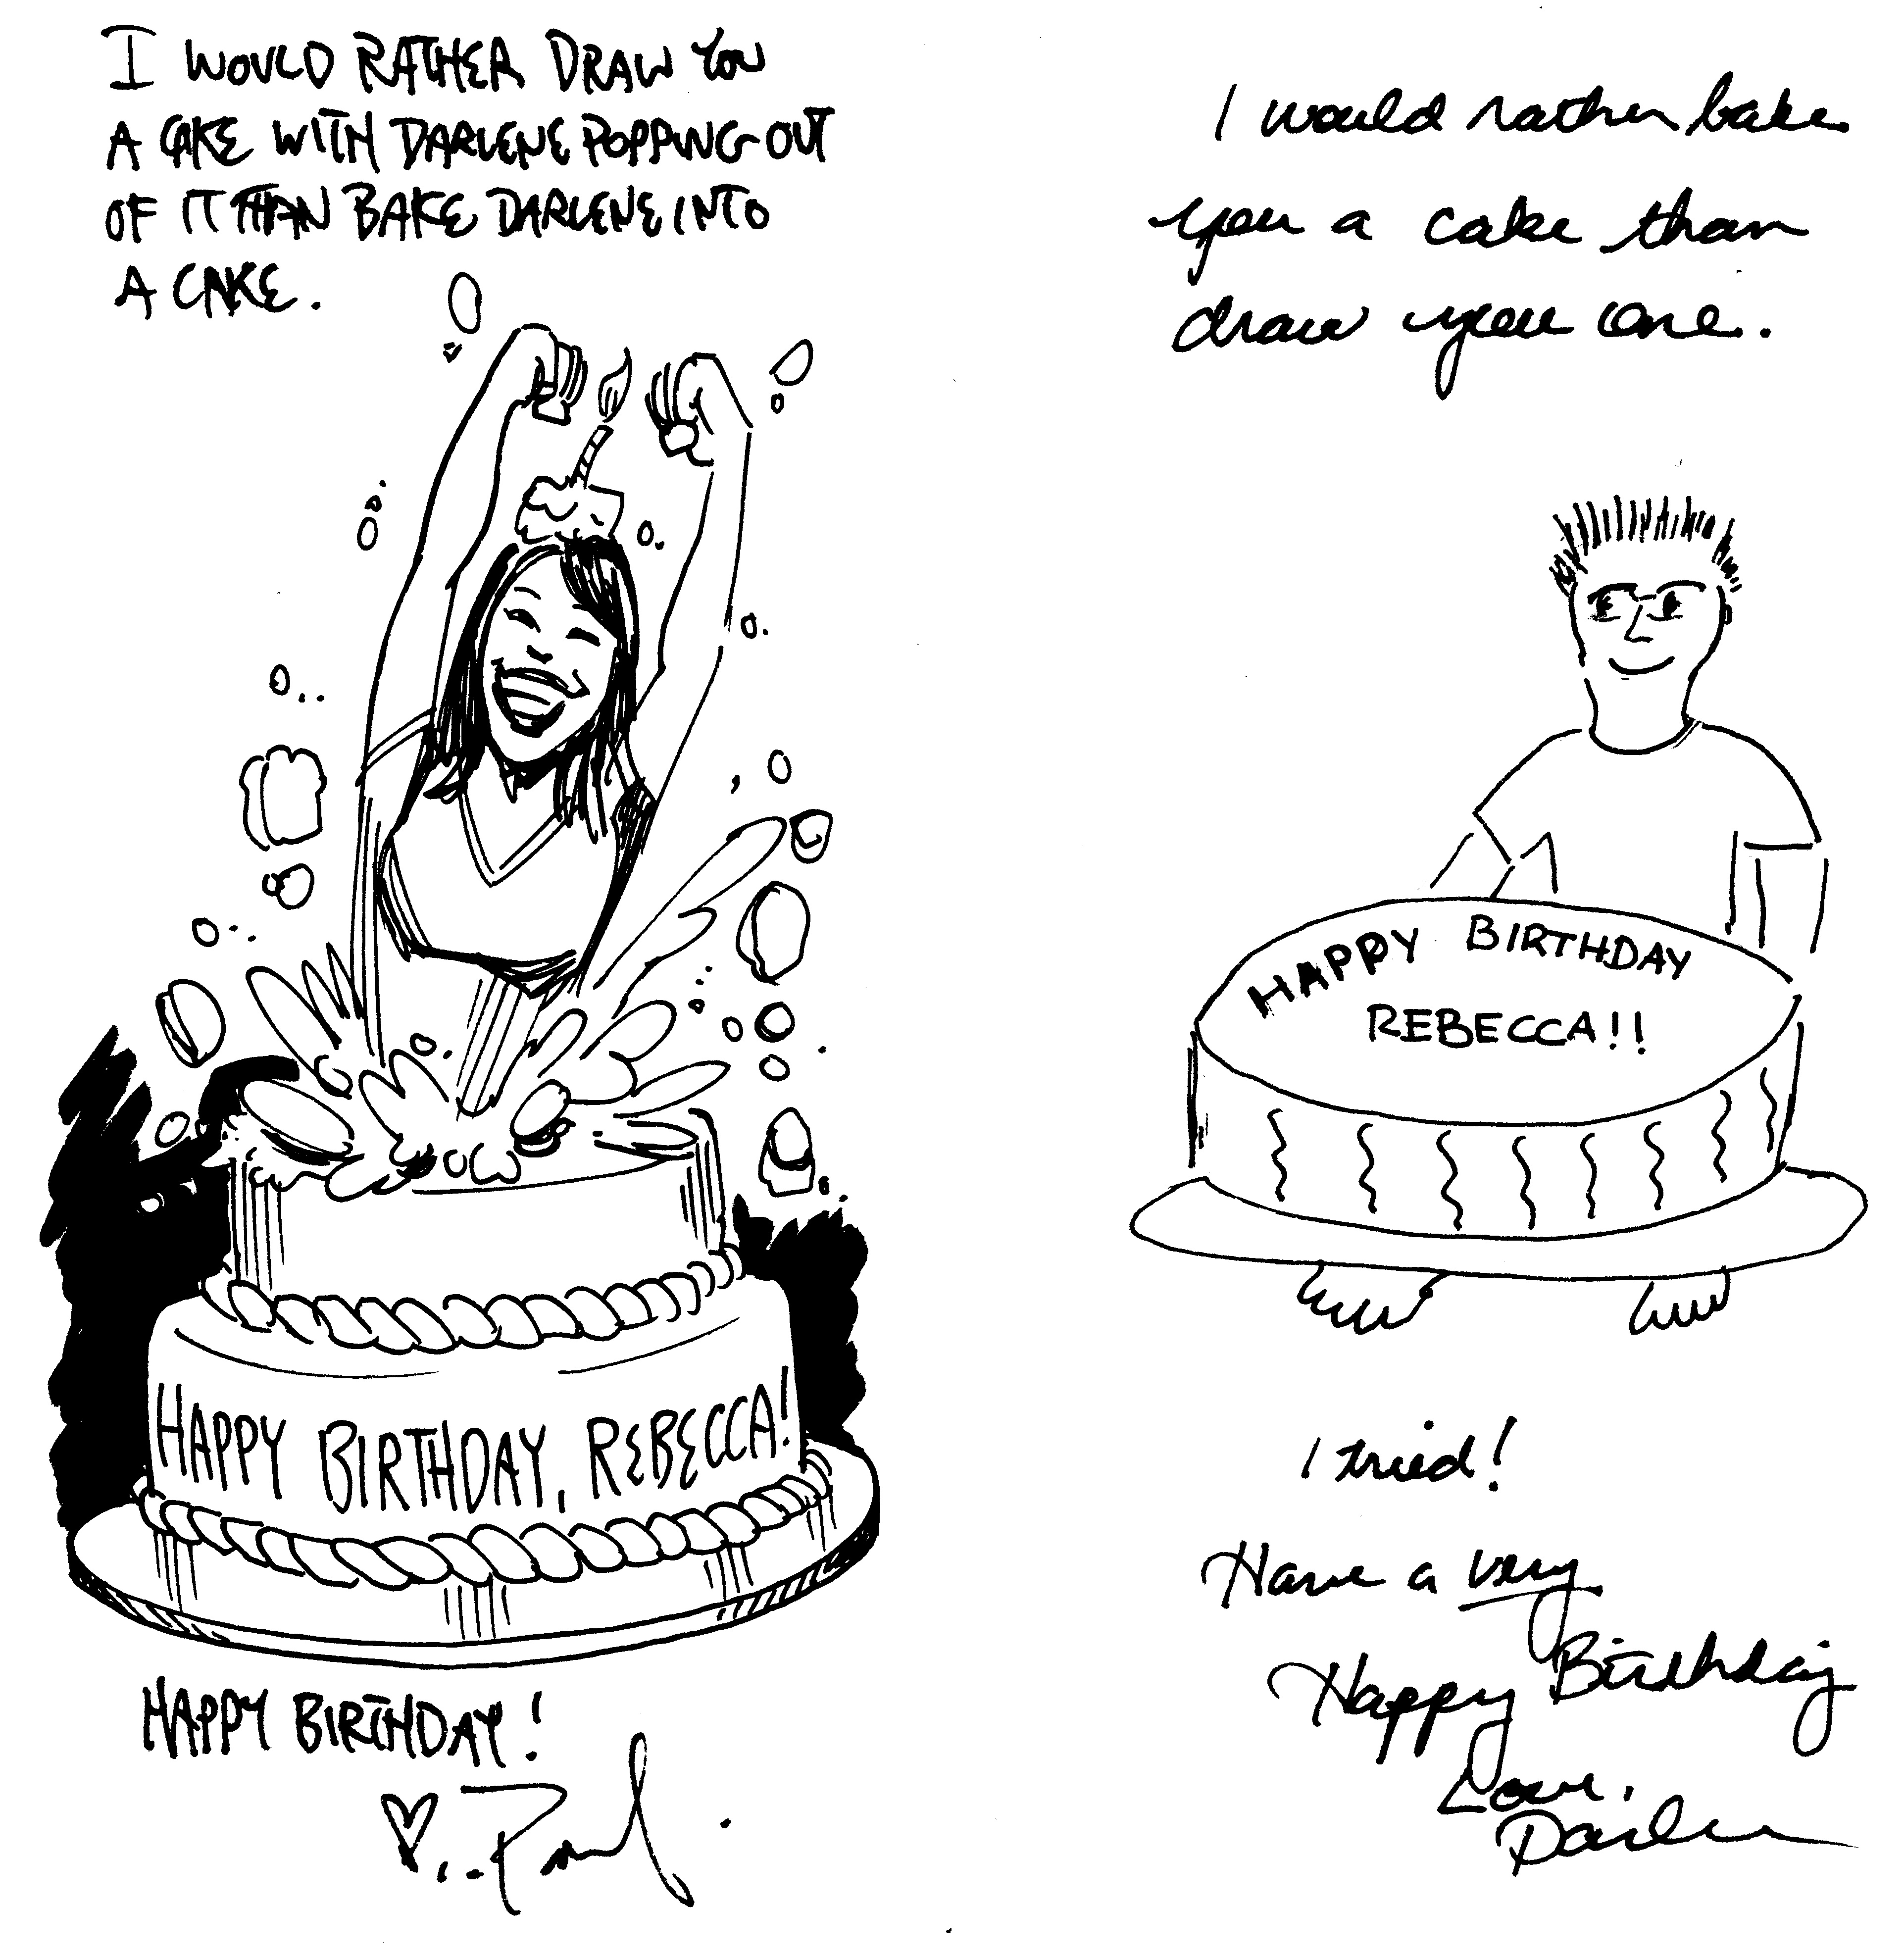 Illustrations of Darlene and Paul bearing birthday cakes, by Paul and Darlene Horn, respectively